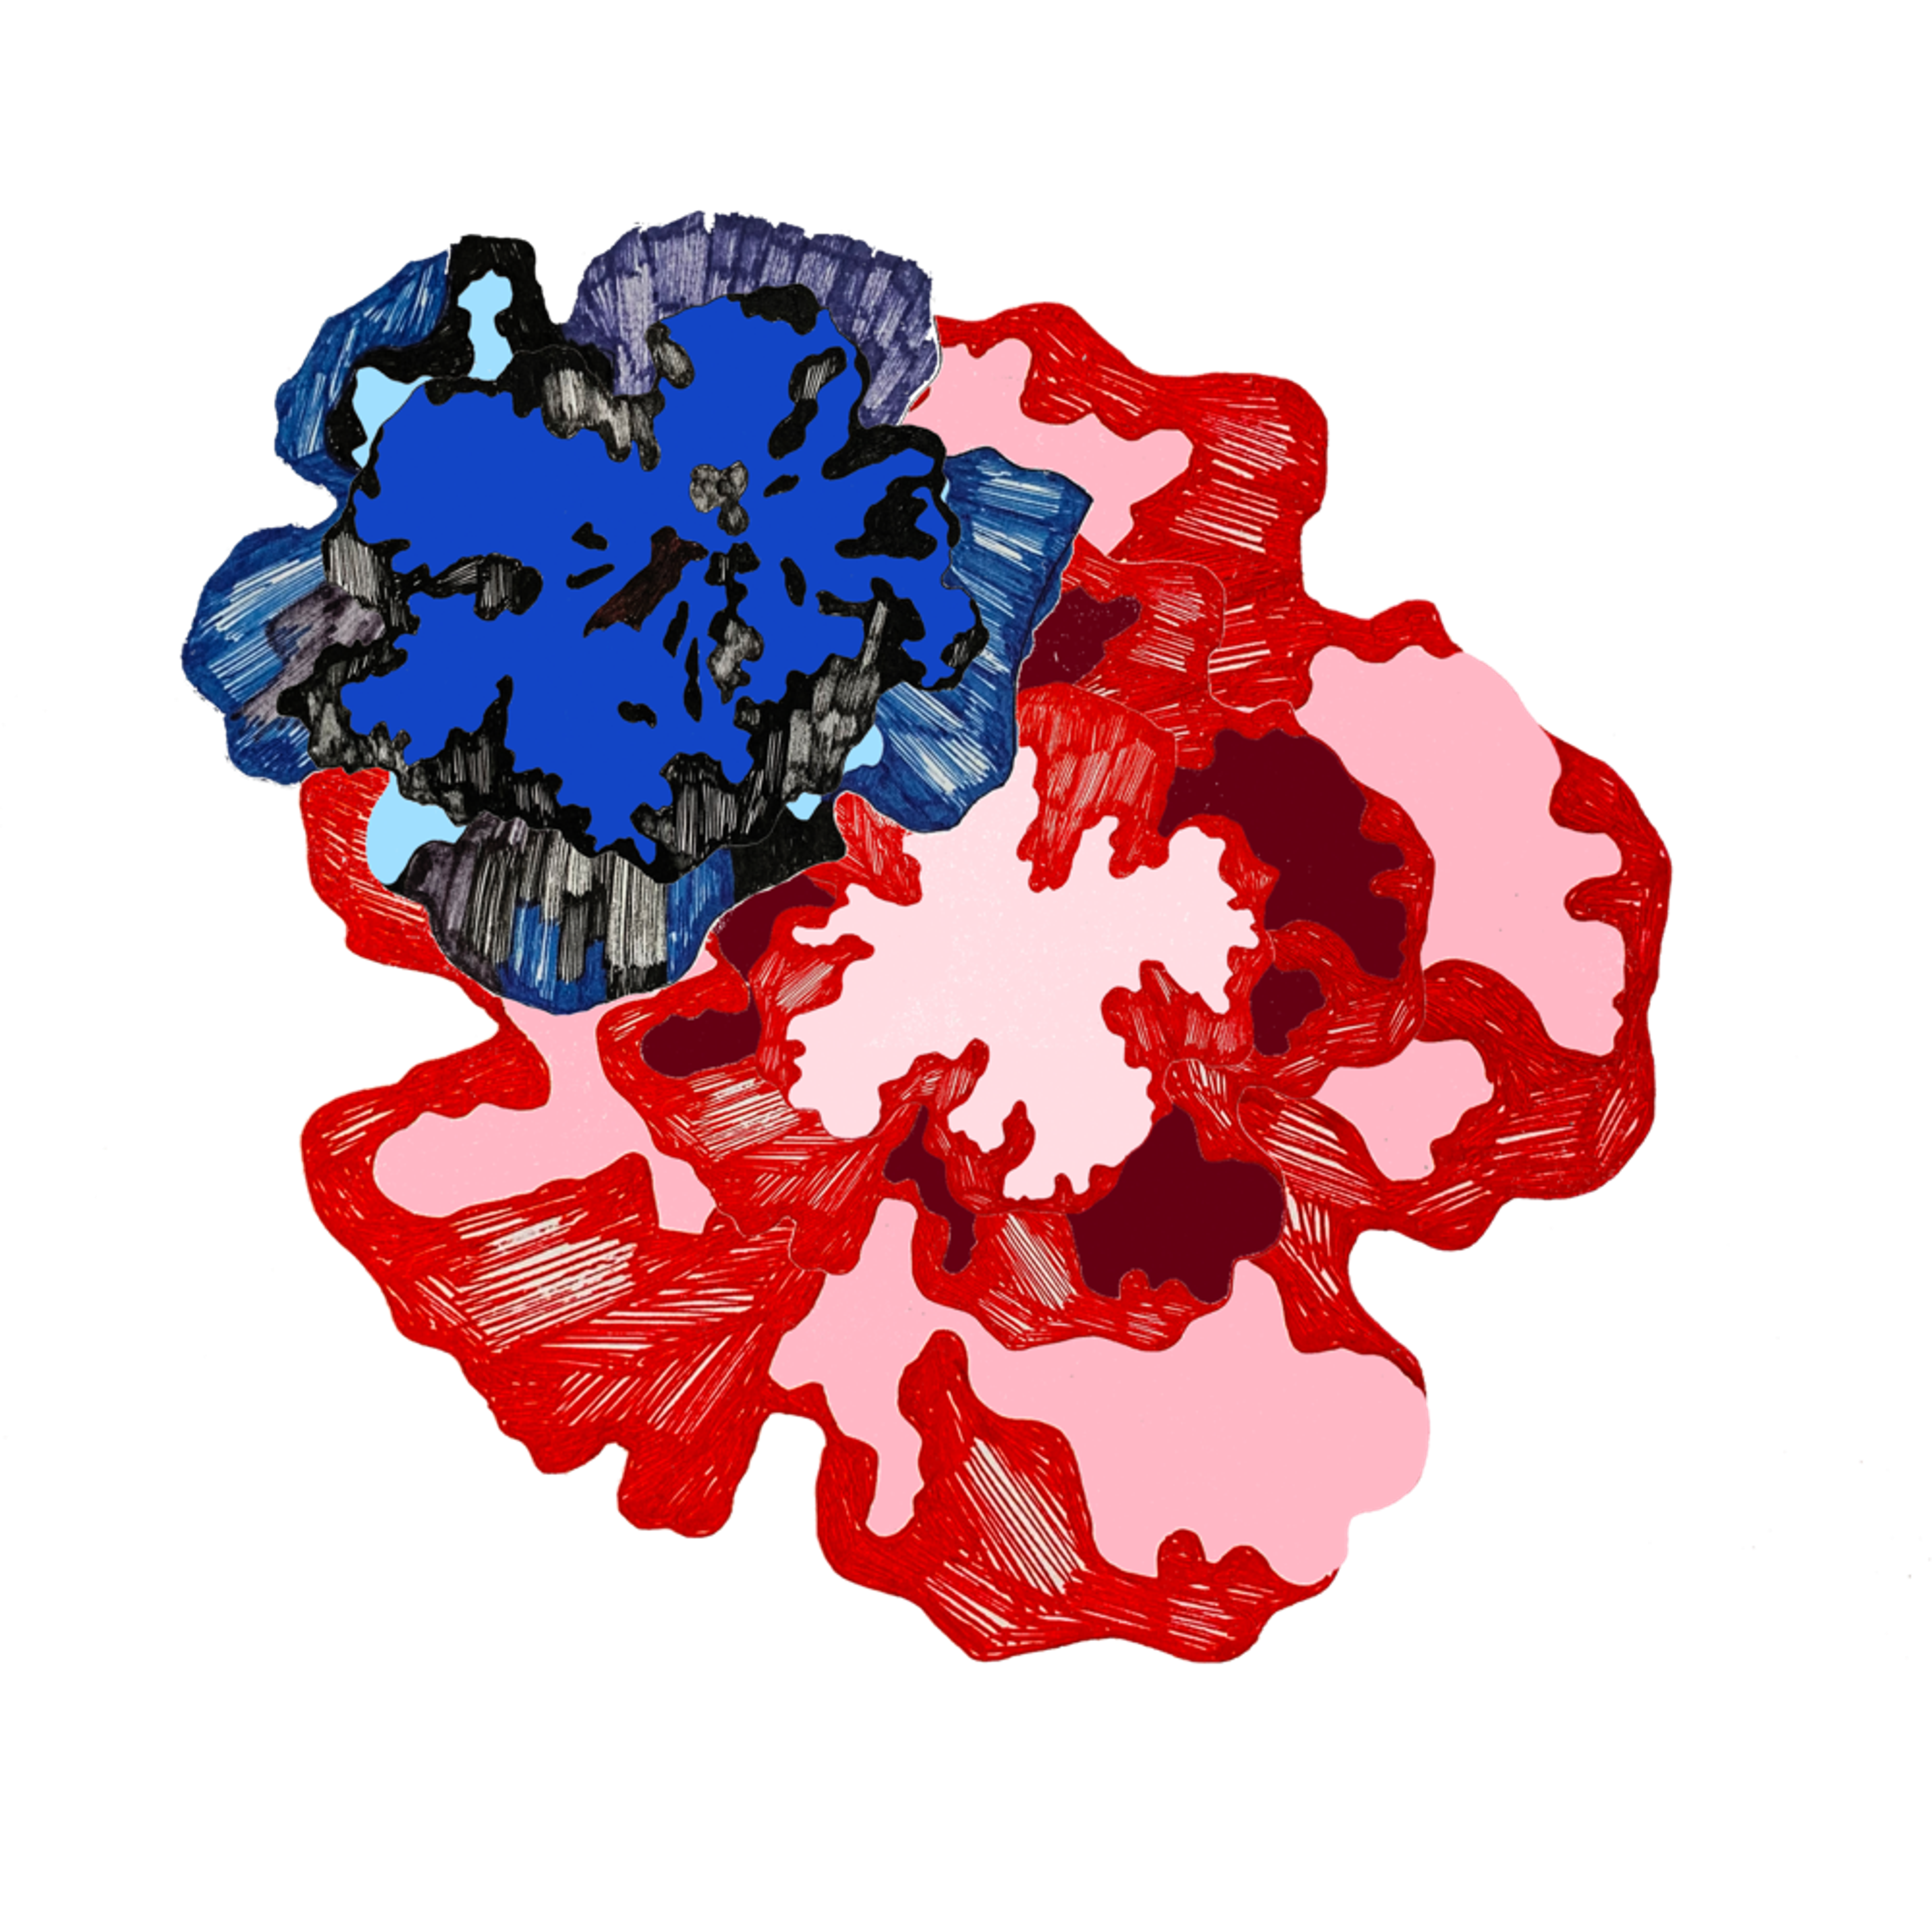 Abstract illustration of two flowery shapes, one in red and one in blue.